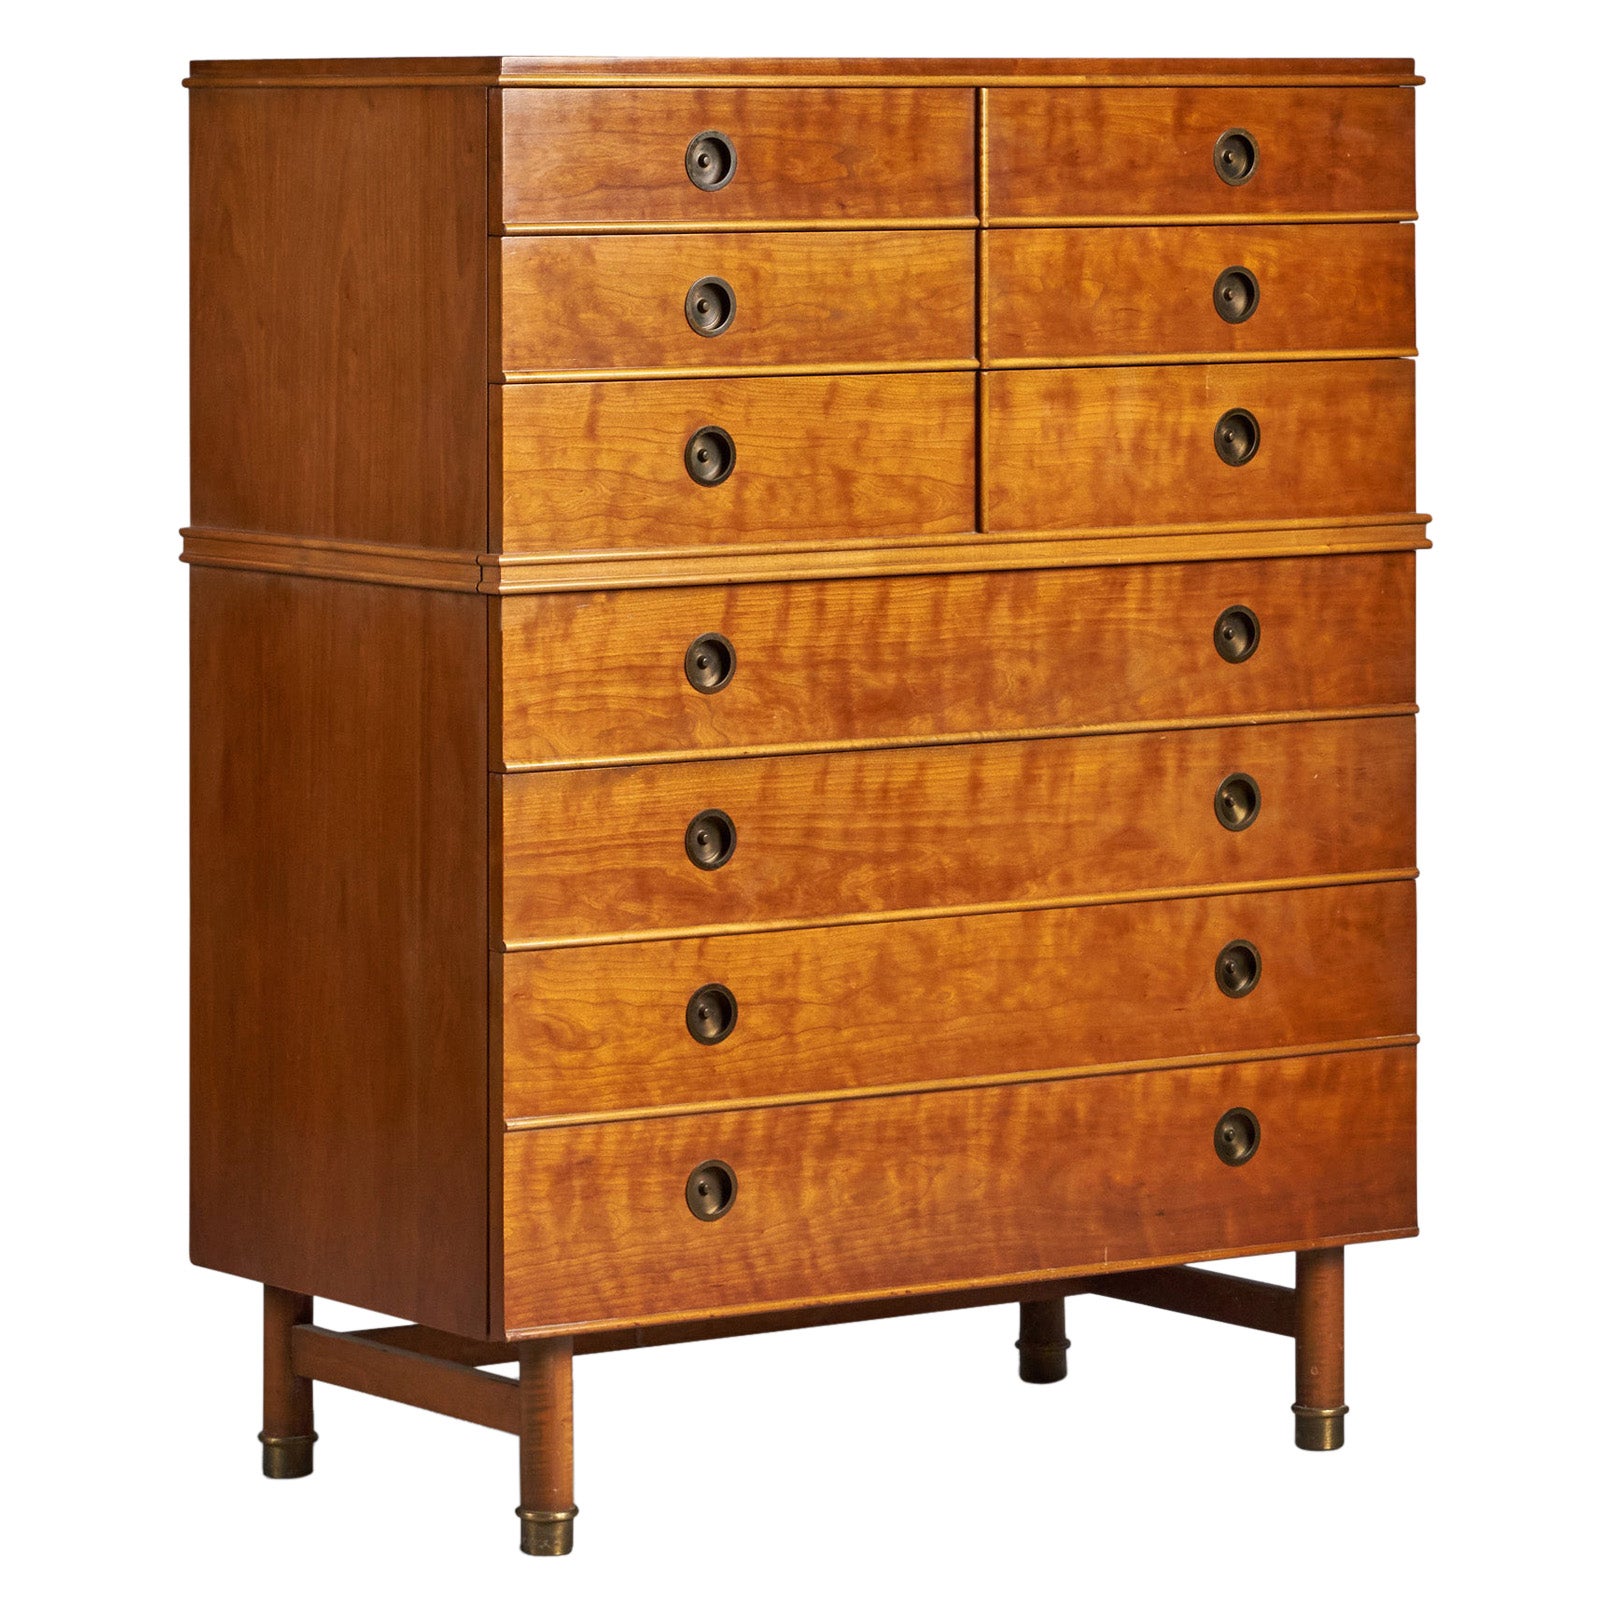 Renzo Rutili, Chest of Drawers, Mahogany, Maple, Brass, USA, 1950s For Sale